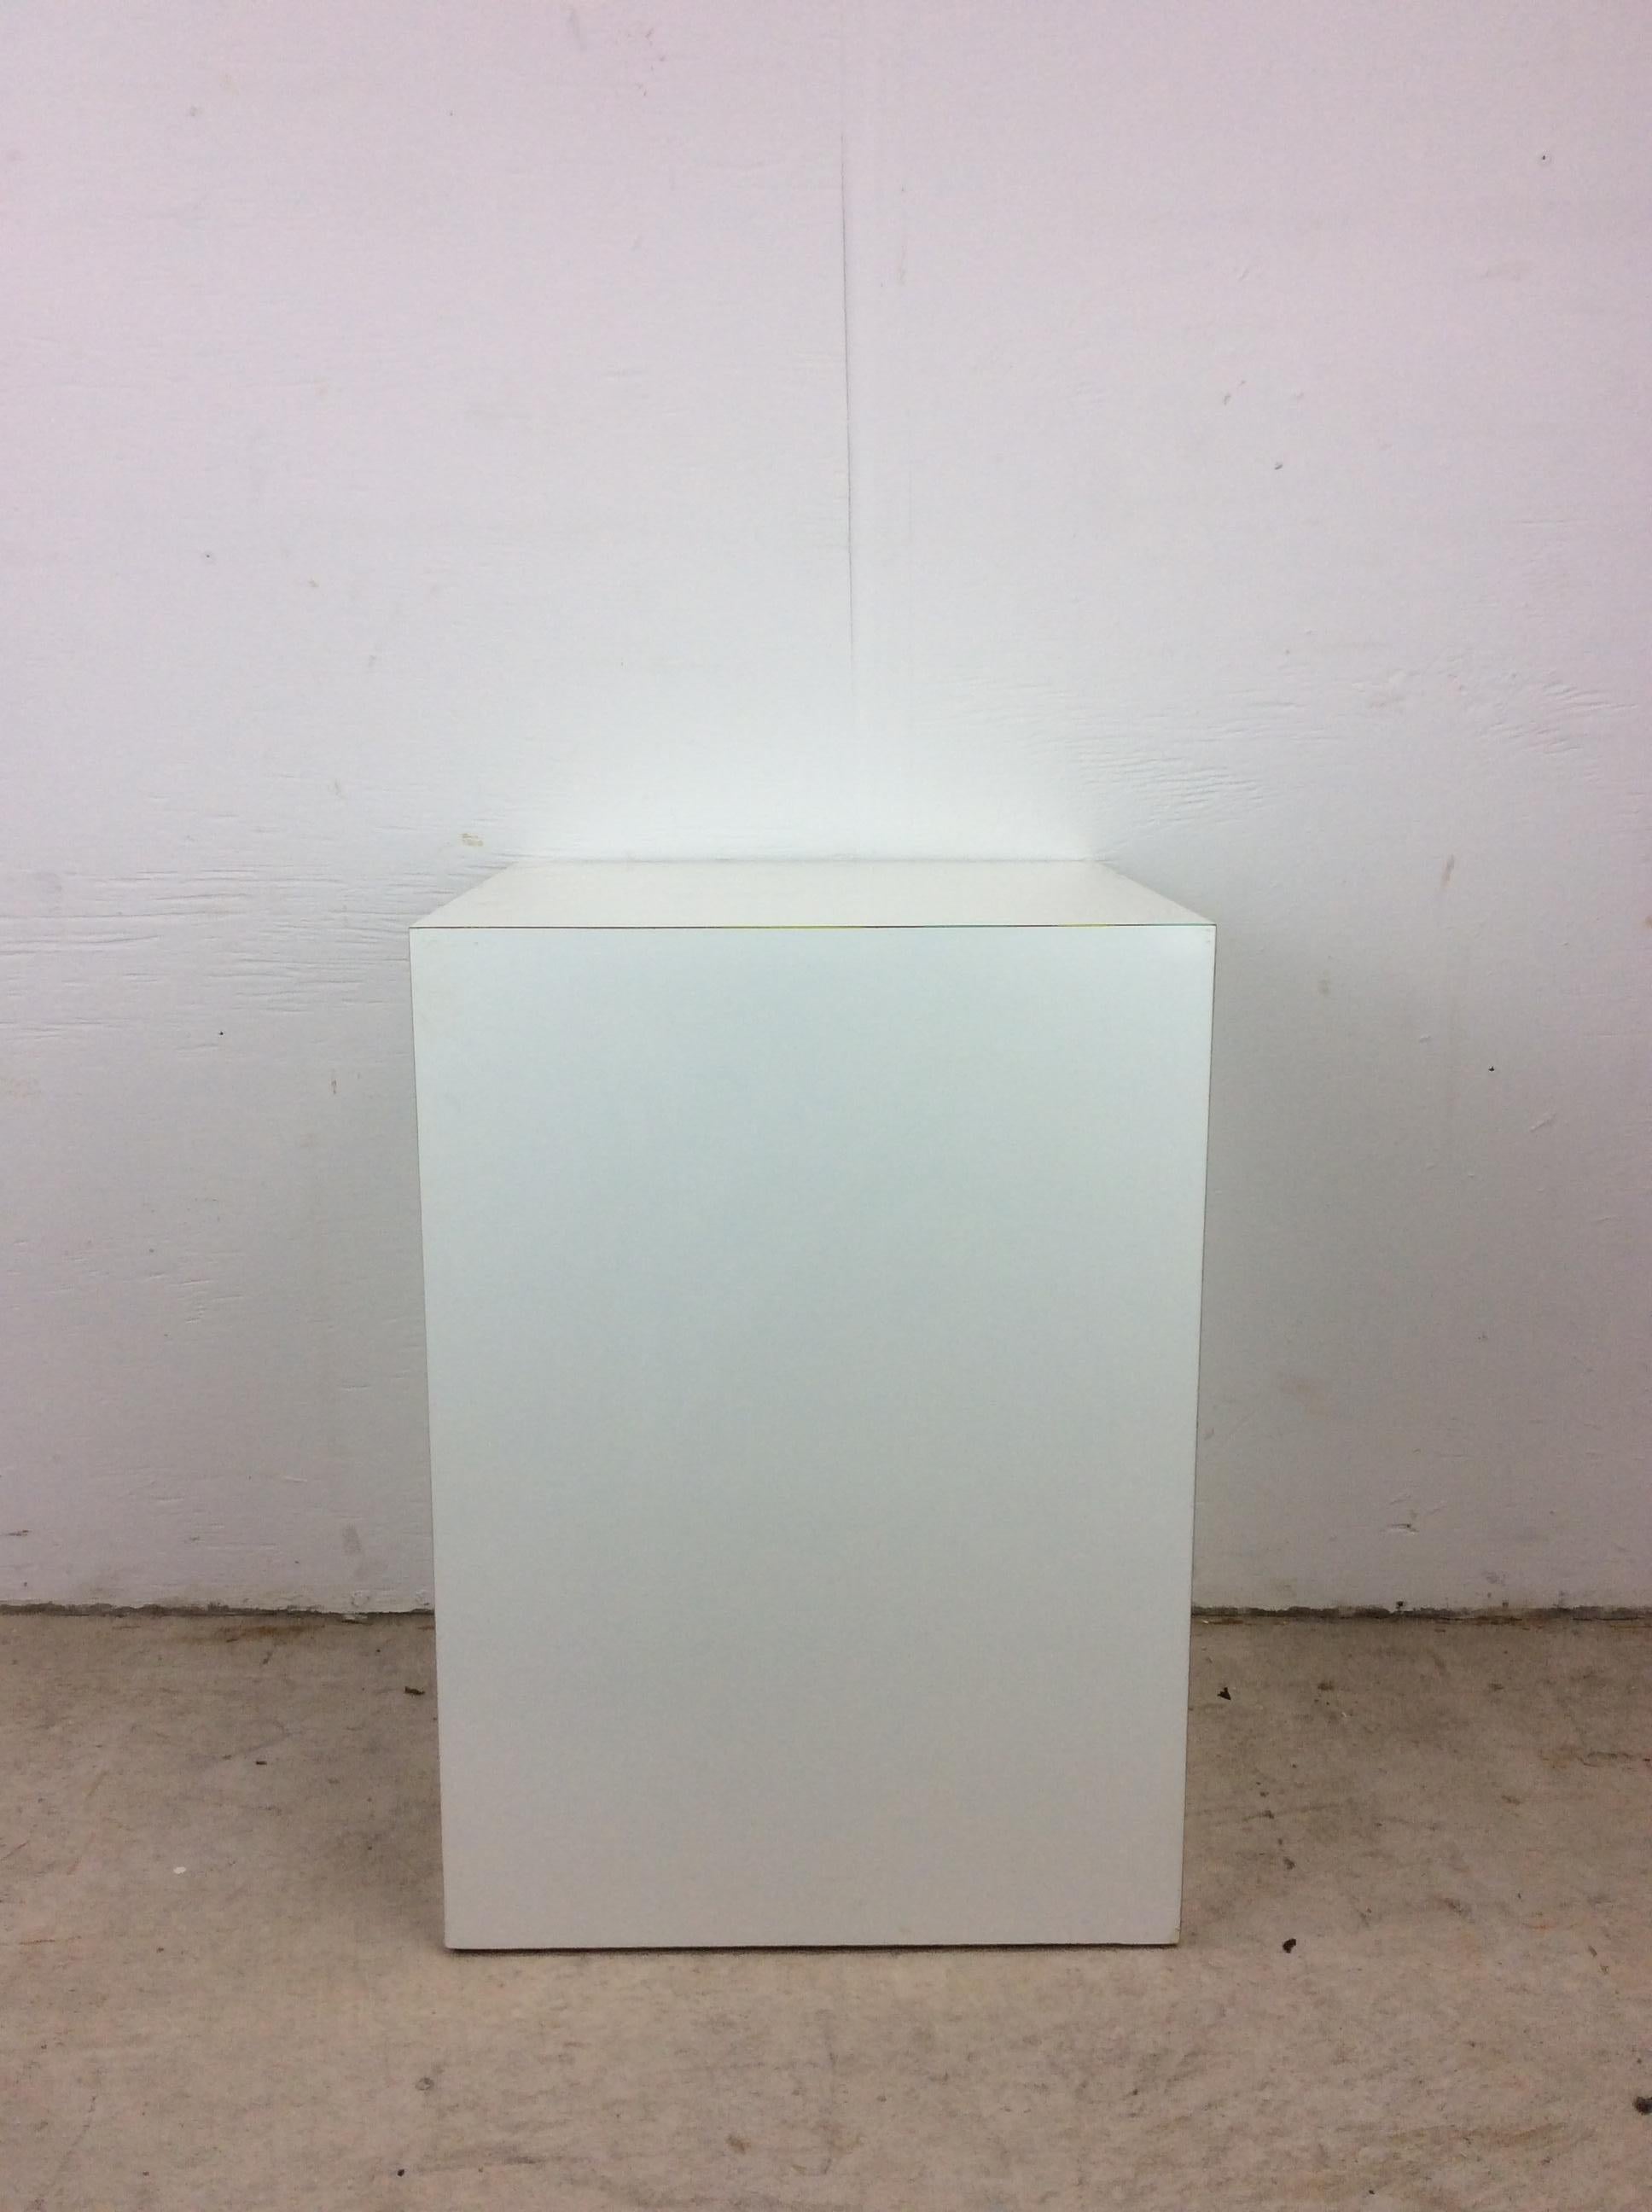 This post modern decorative pedestal features original white lacquer finish on five sides.  

Check out our other listings for more post-modern style furniture pieces. 

Dimensions: 15w 15d 21h

Condition: The original white lacquer finish has some